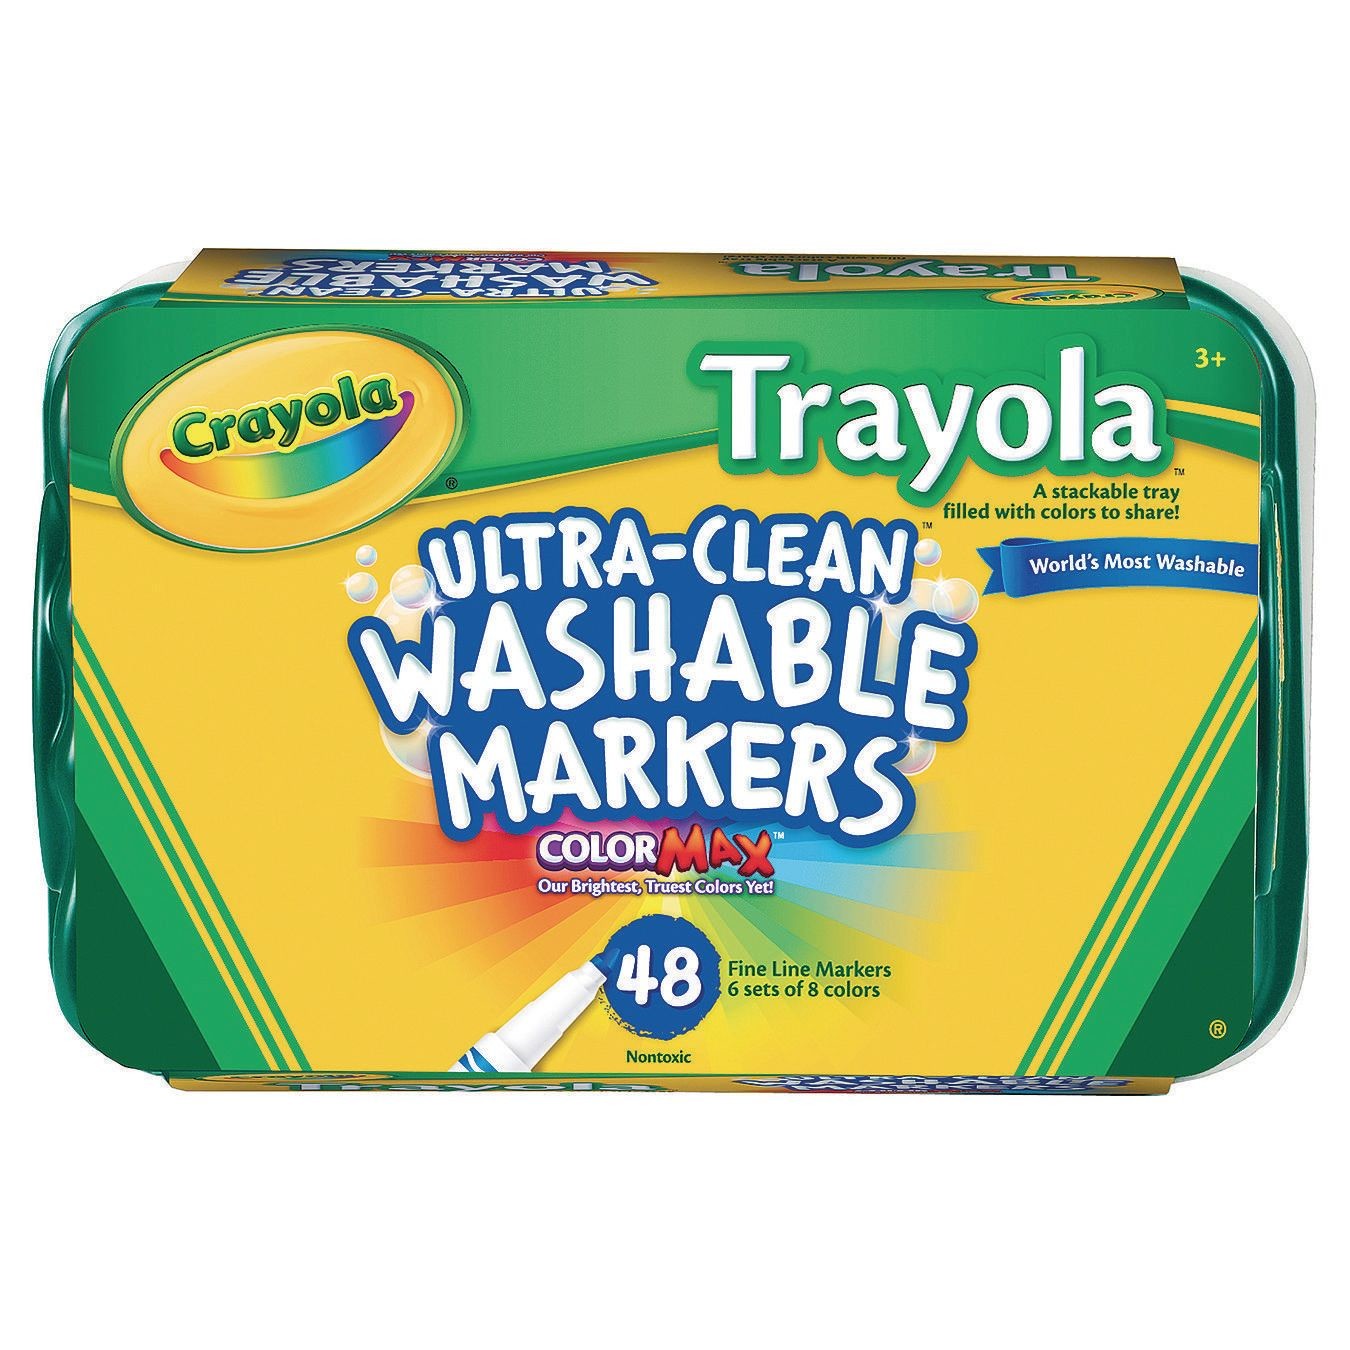 Crayola Ultra-Clean Washable Marker Color Max - sets of 12 - Fine